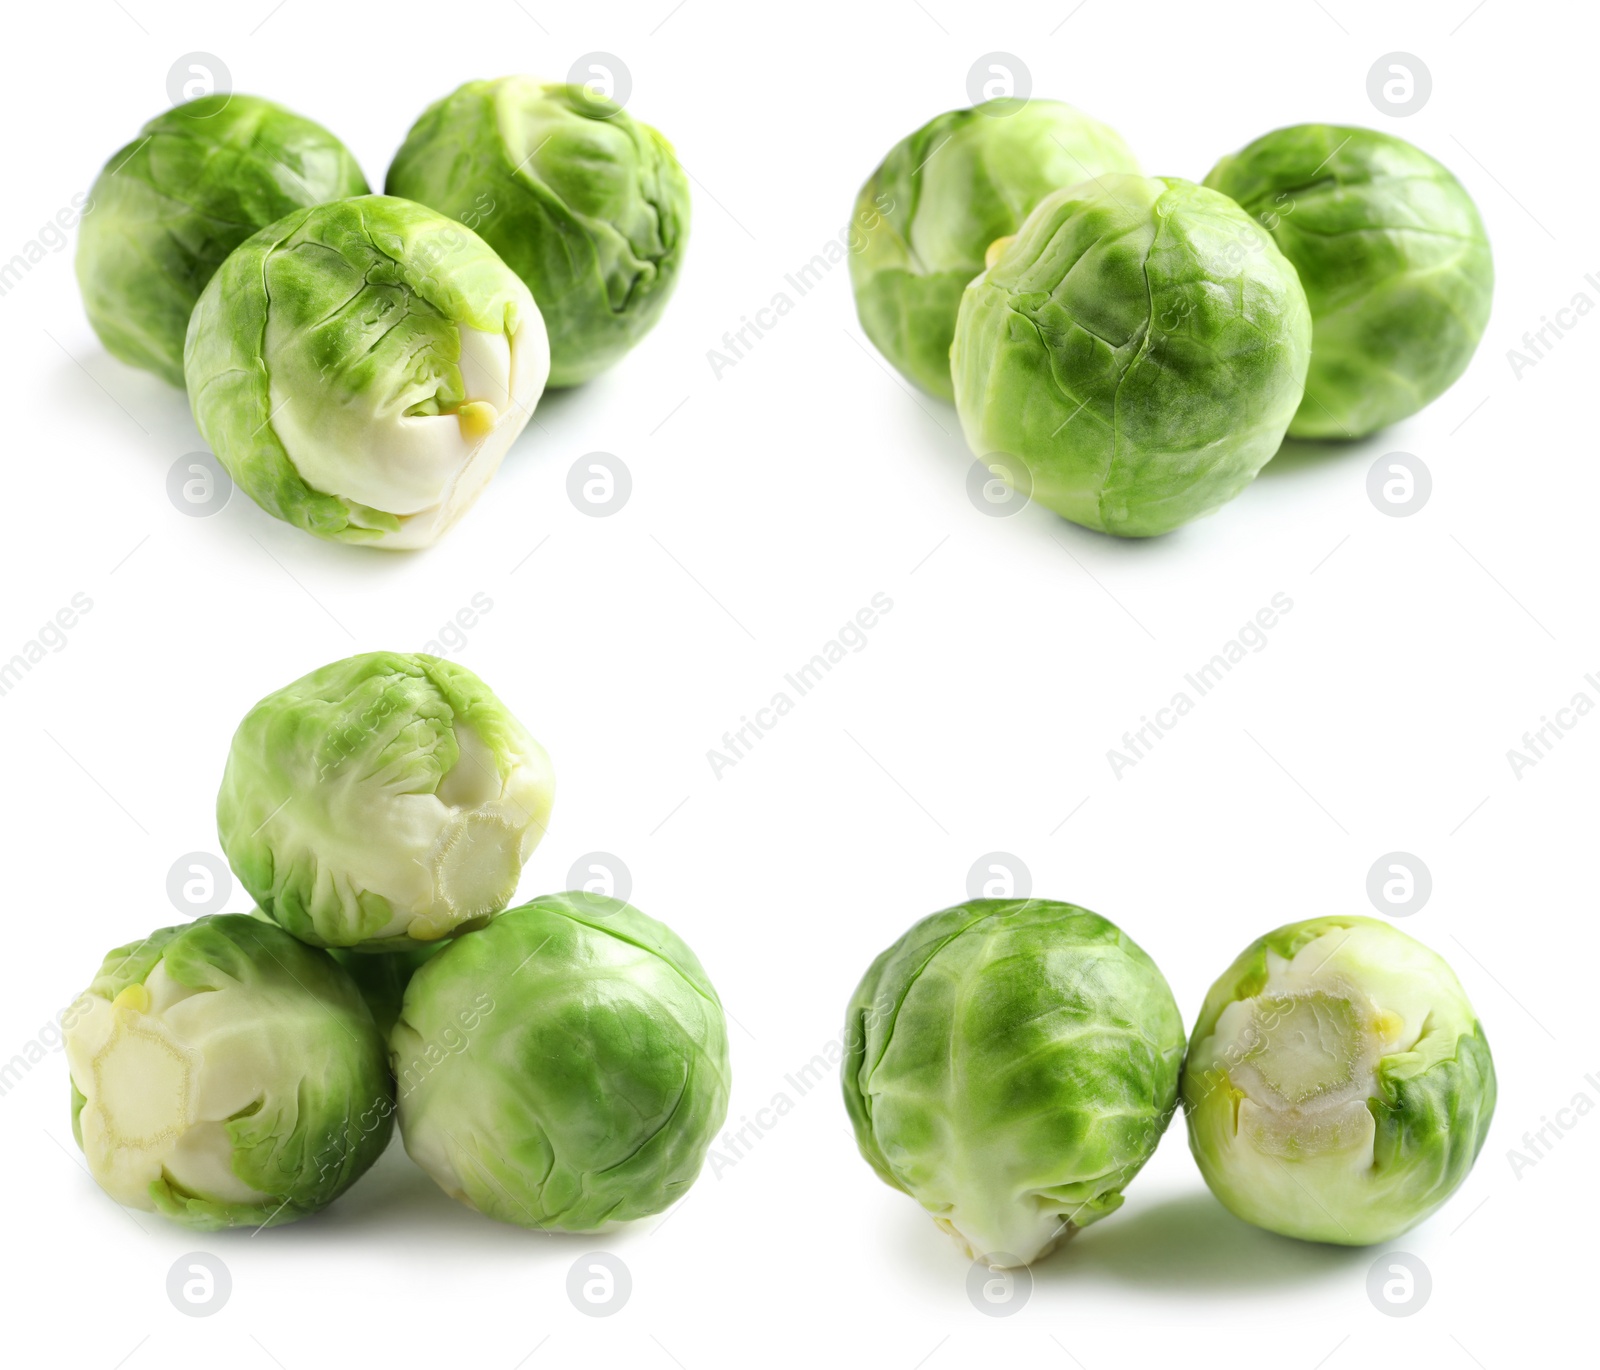 Image of Set of fresh Brussels sprouts on white background